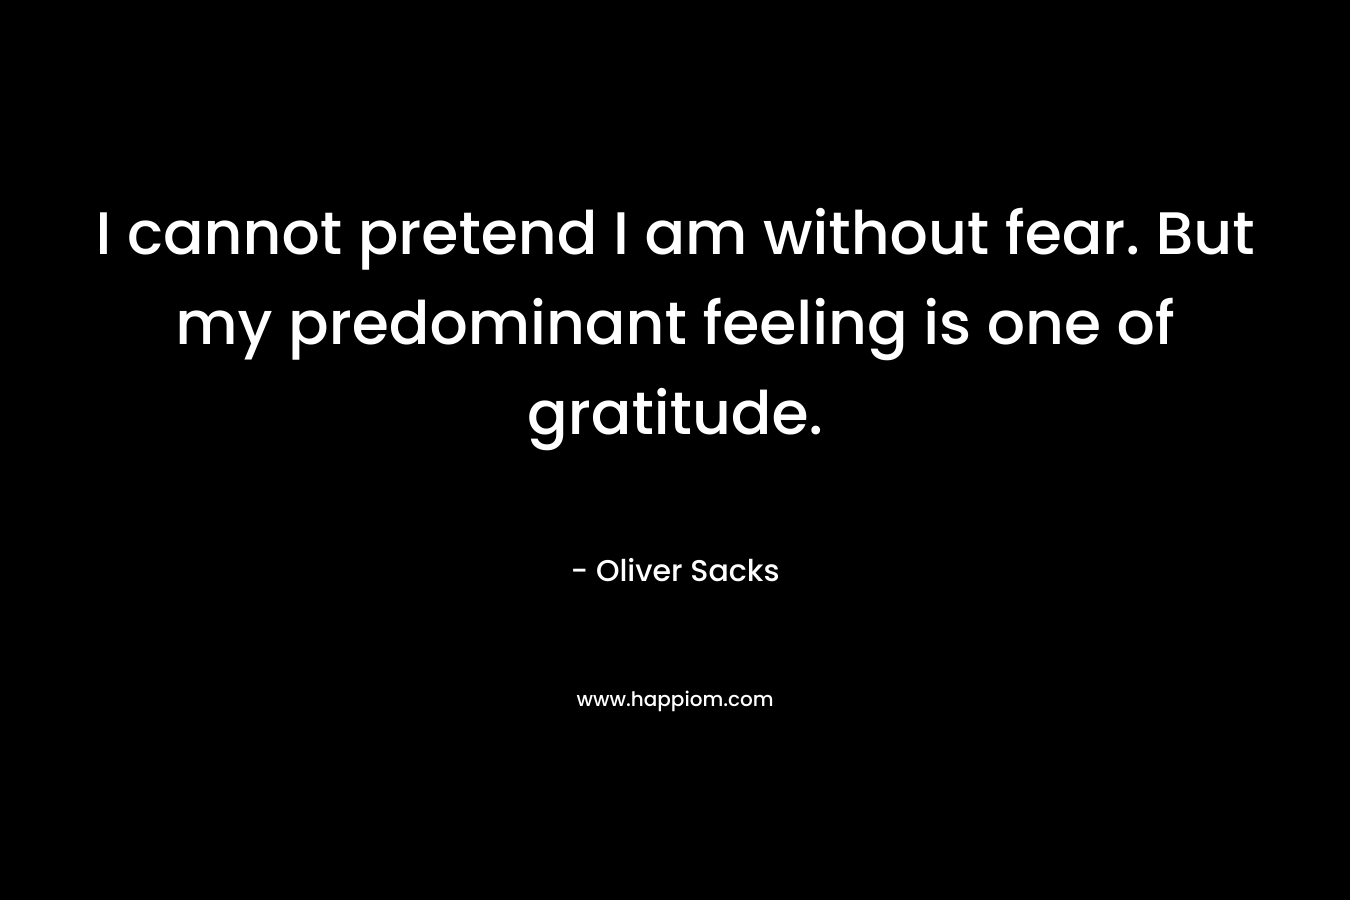 I cannot pretend I am without fear. But my predominant feeling is one of gratitude. – Oliver Sacks